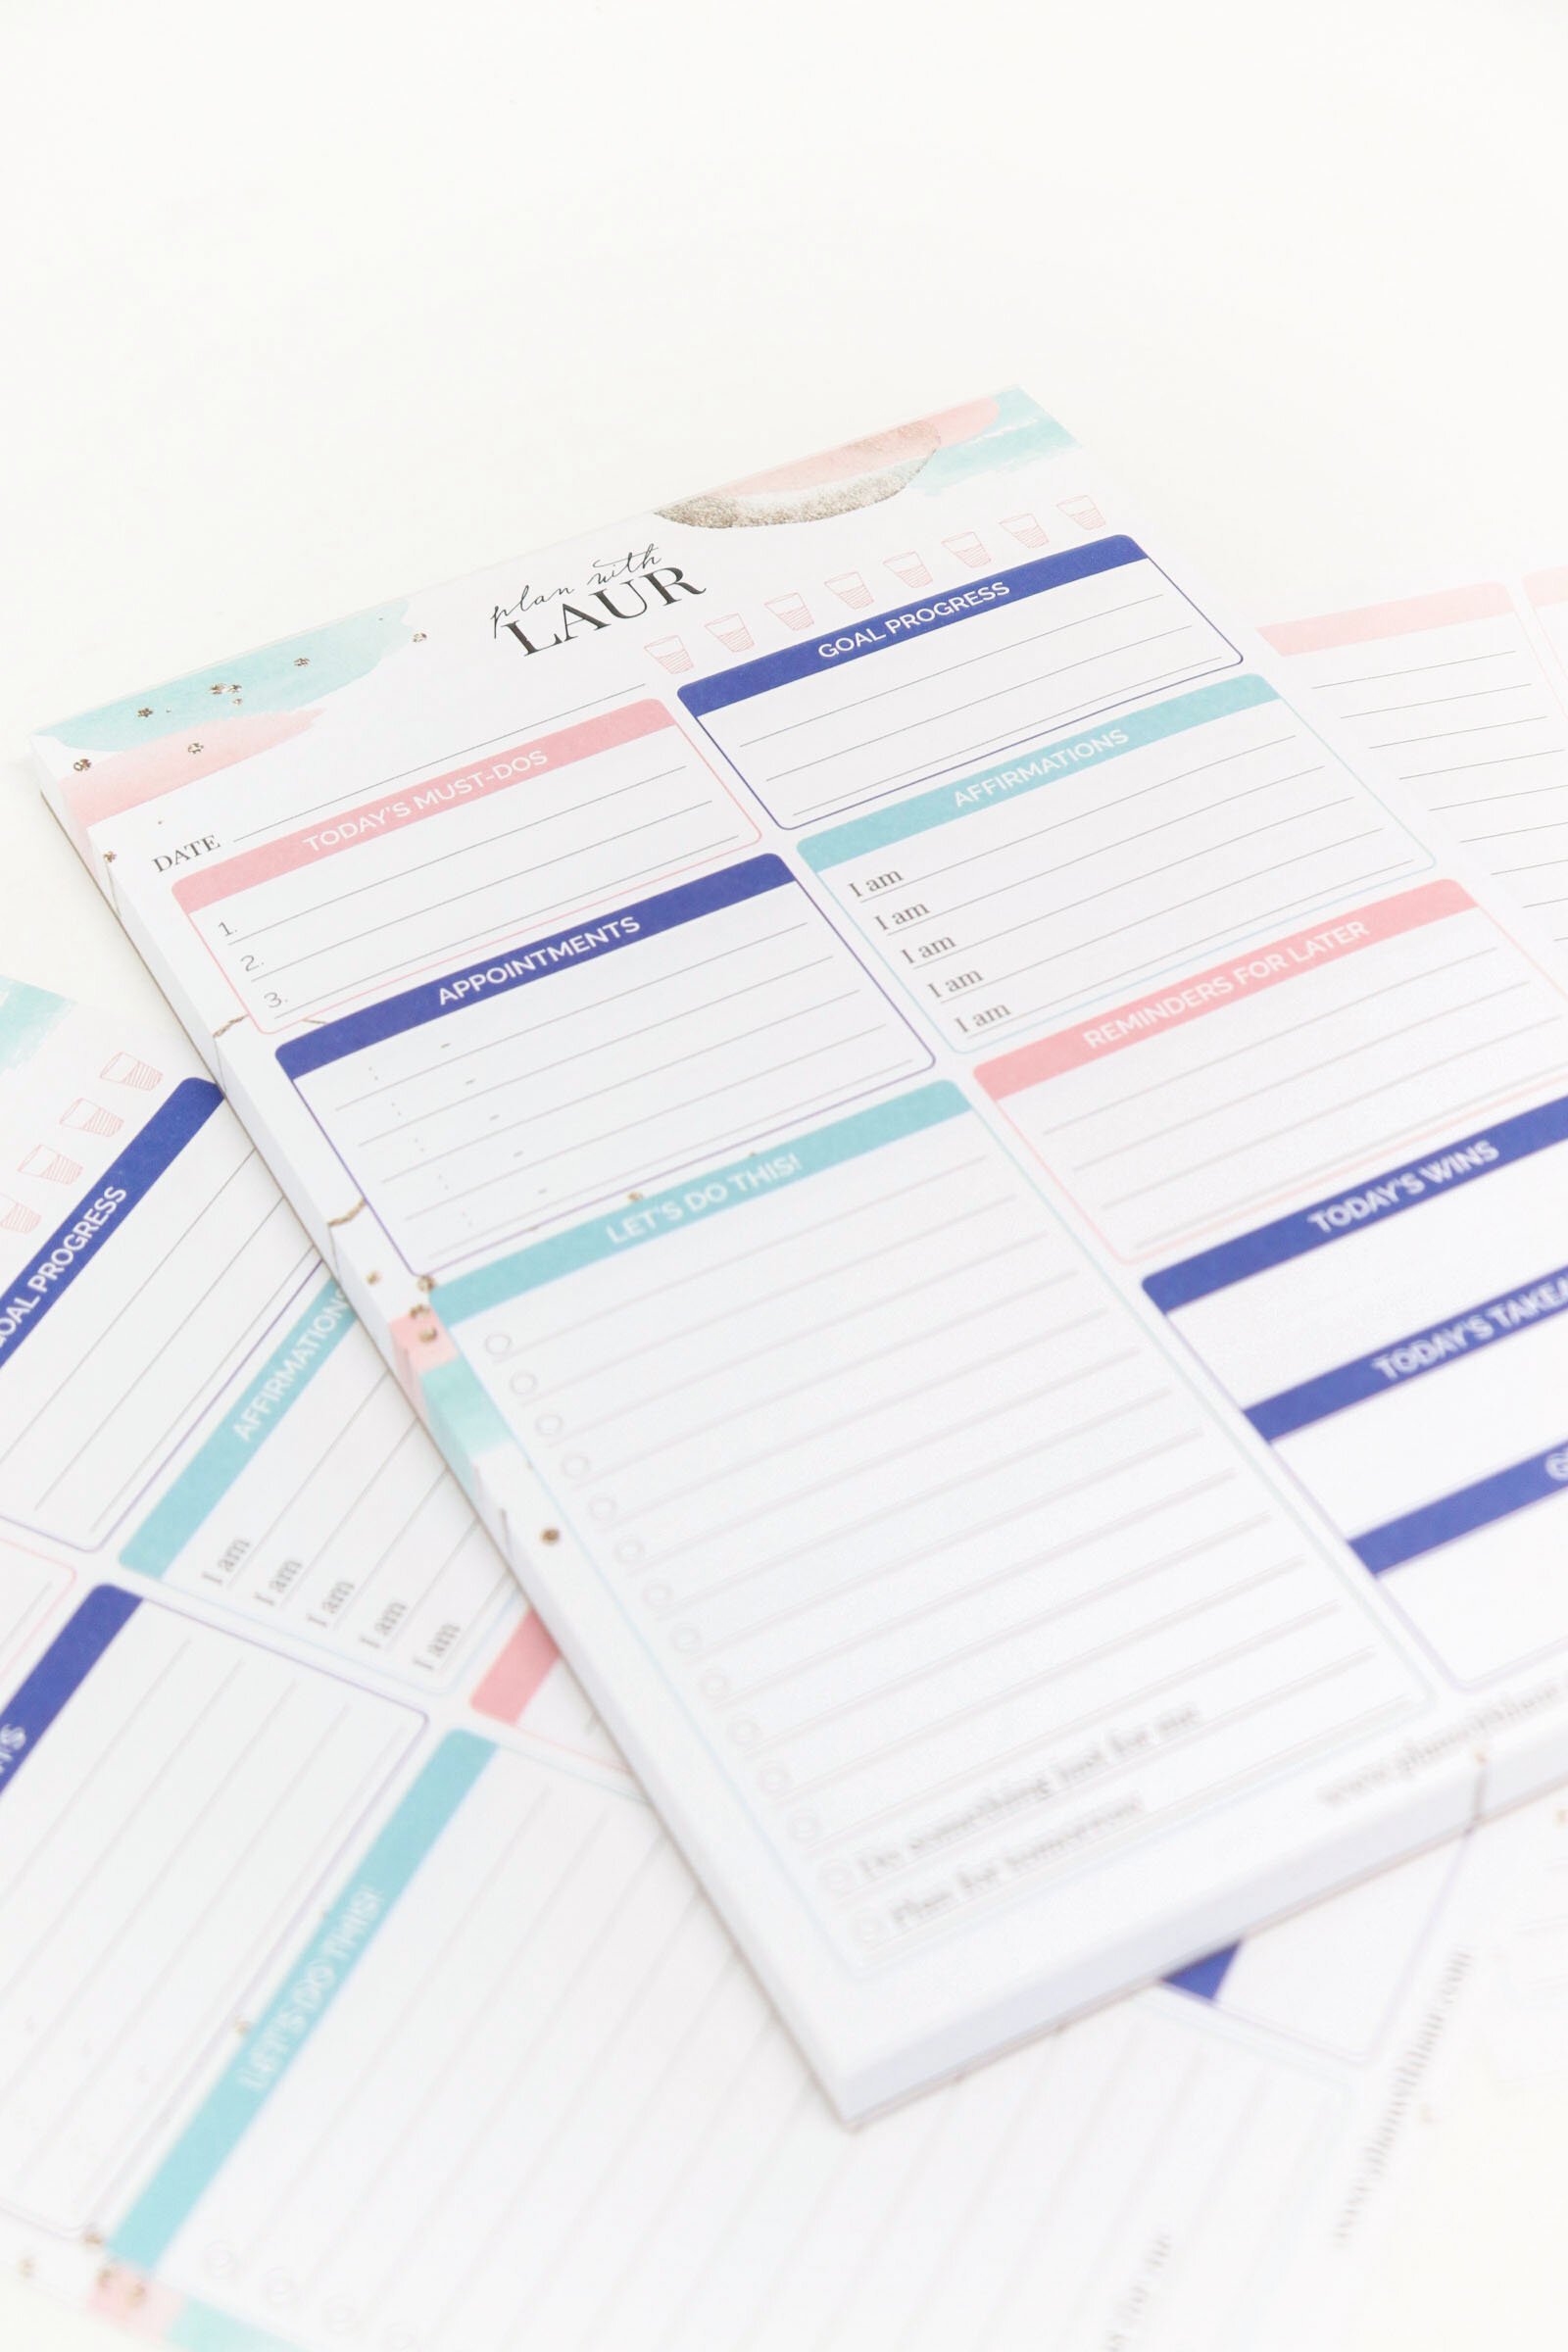 10_ 6 x 9 Plan With Laur Planning Pad _ bloom daily planners _ daily to do list for women goal tracking motivational abstract colorful pink blue checklist (2).jpg